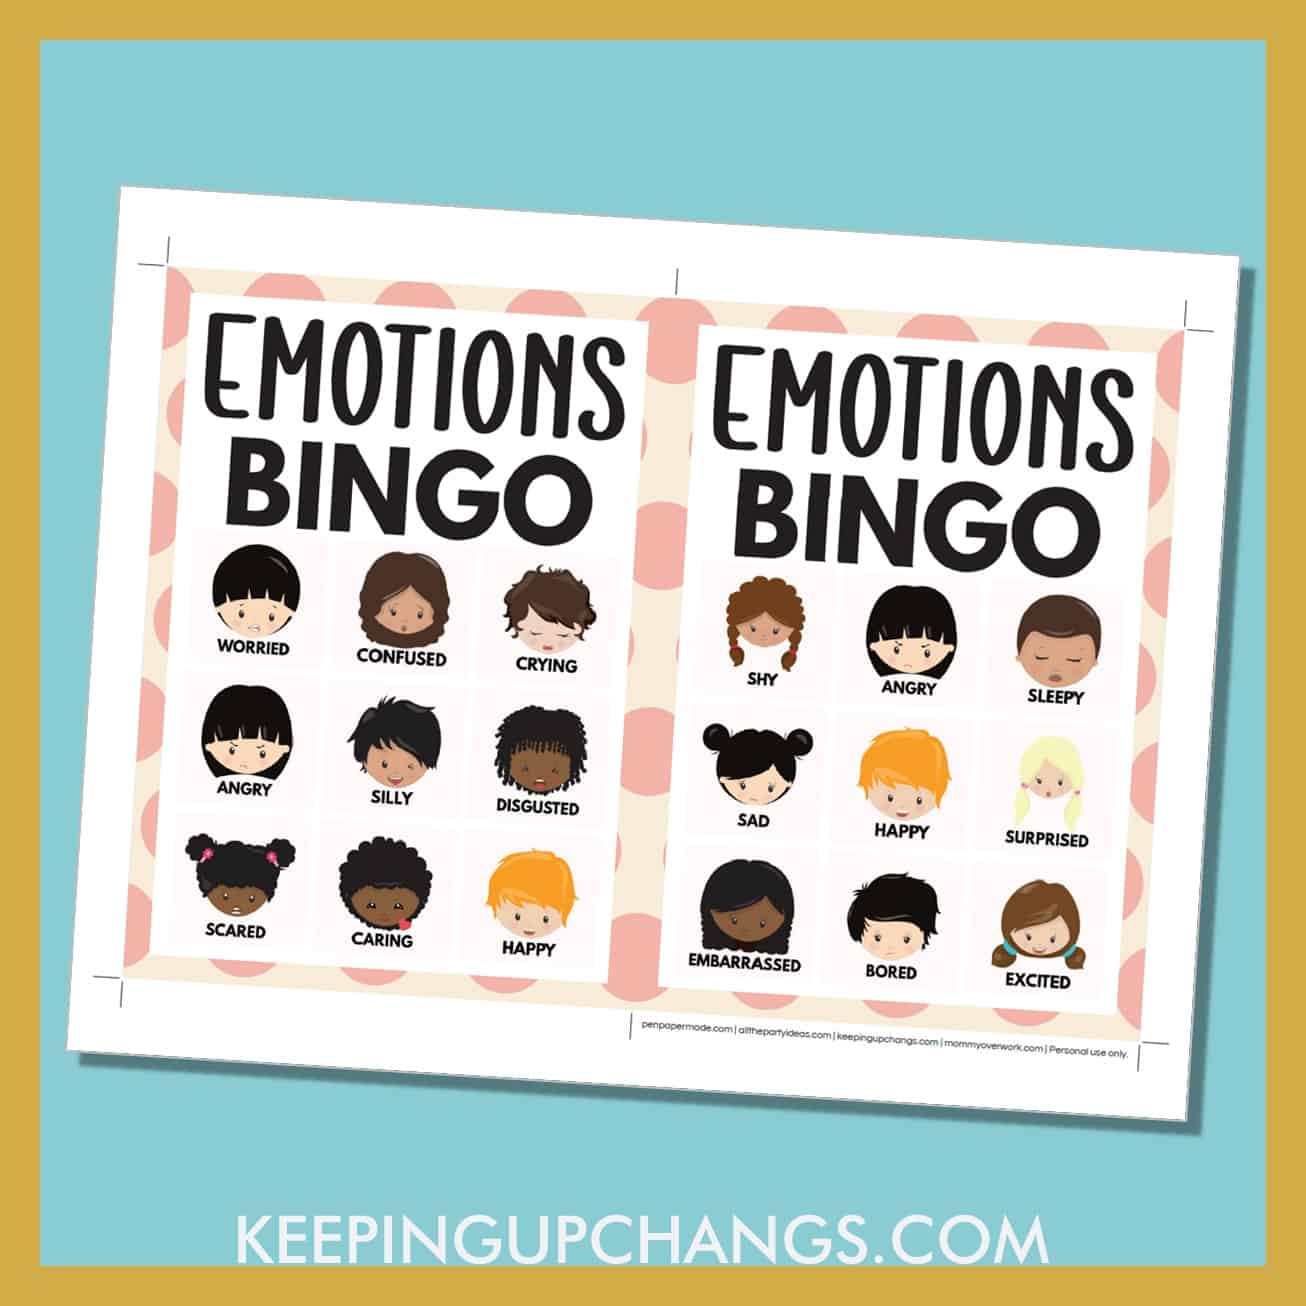 free emotions bingo card 3x3 5x7 game boards with images and text words.